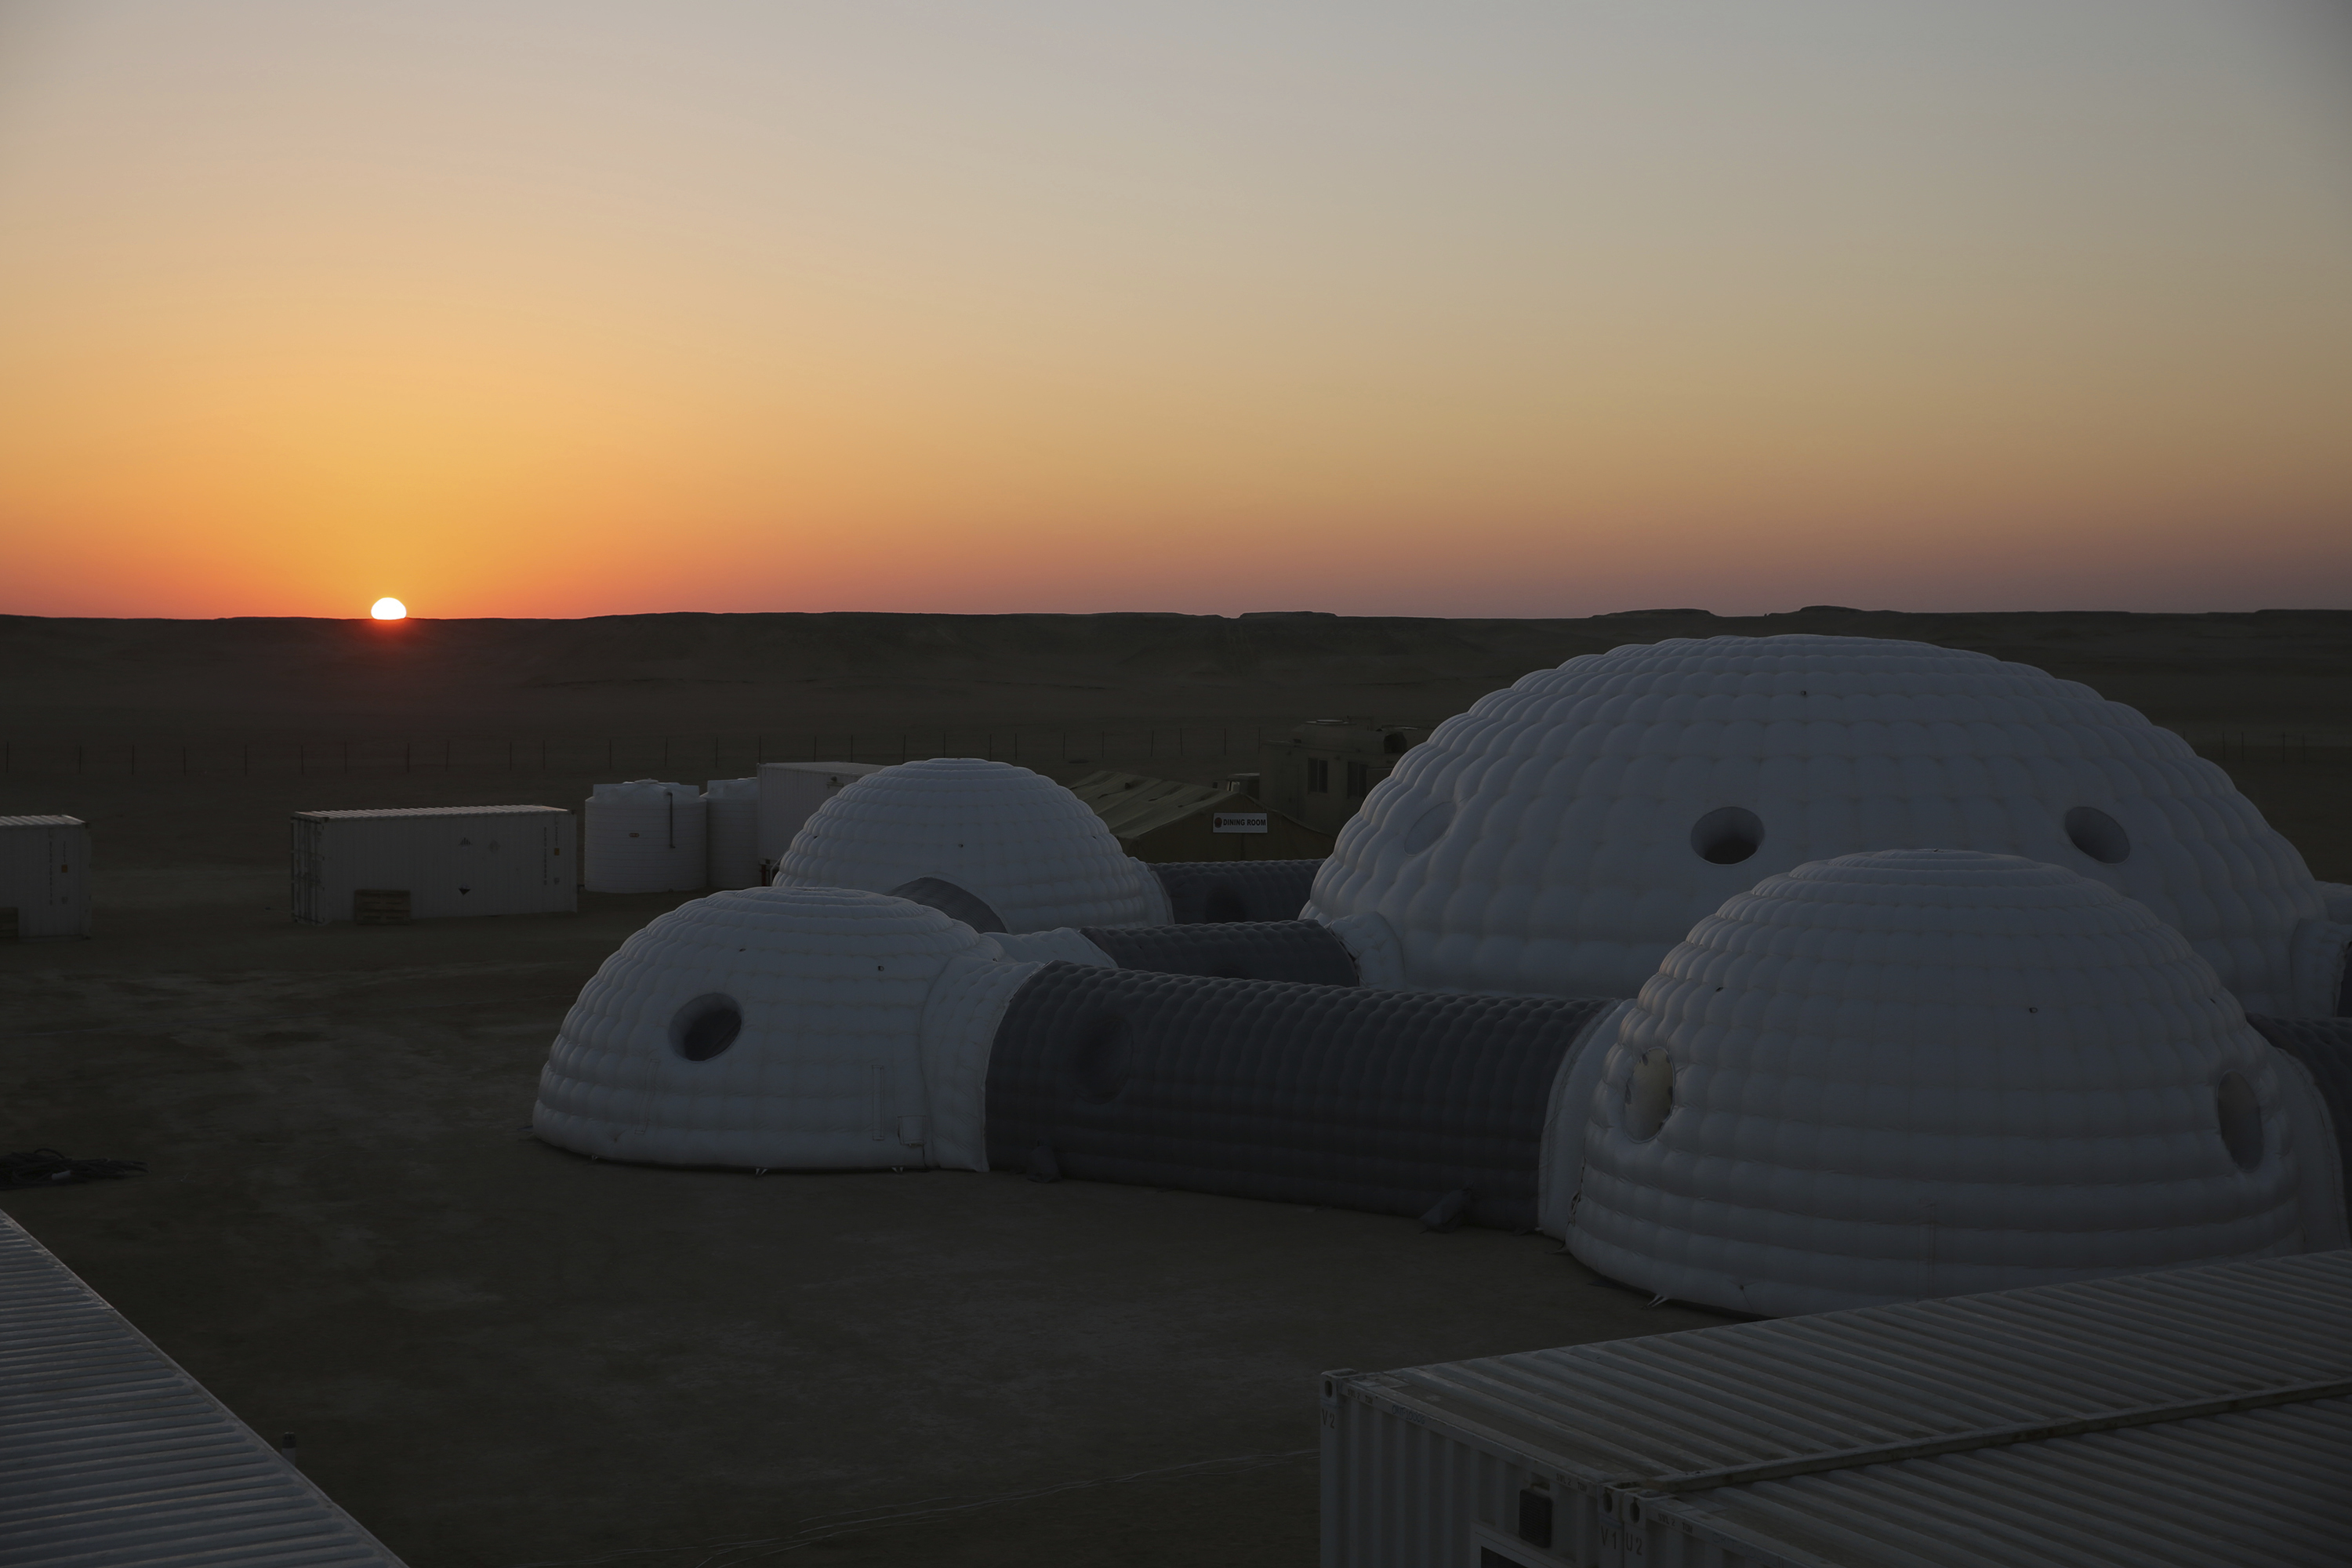 The sun rises over a 2.4-ton inflated habitat used by the AMADEE-18 Mars simulation in the Dhofar desert of southern Oman (Sam McNeil/AP)